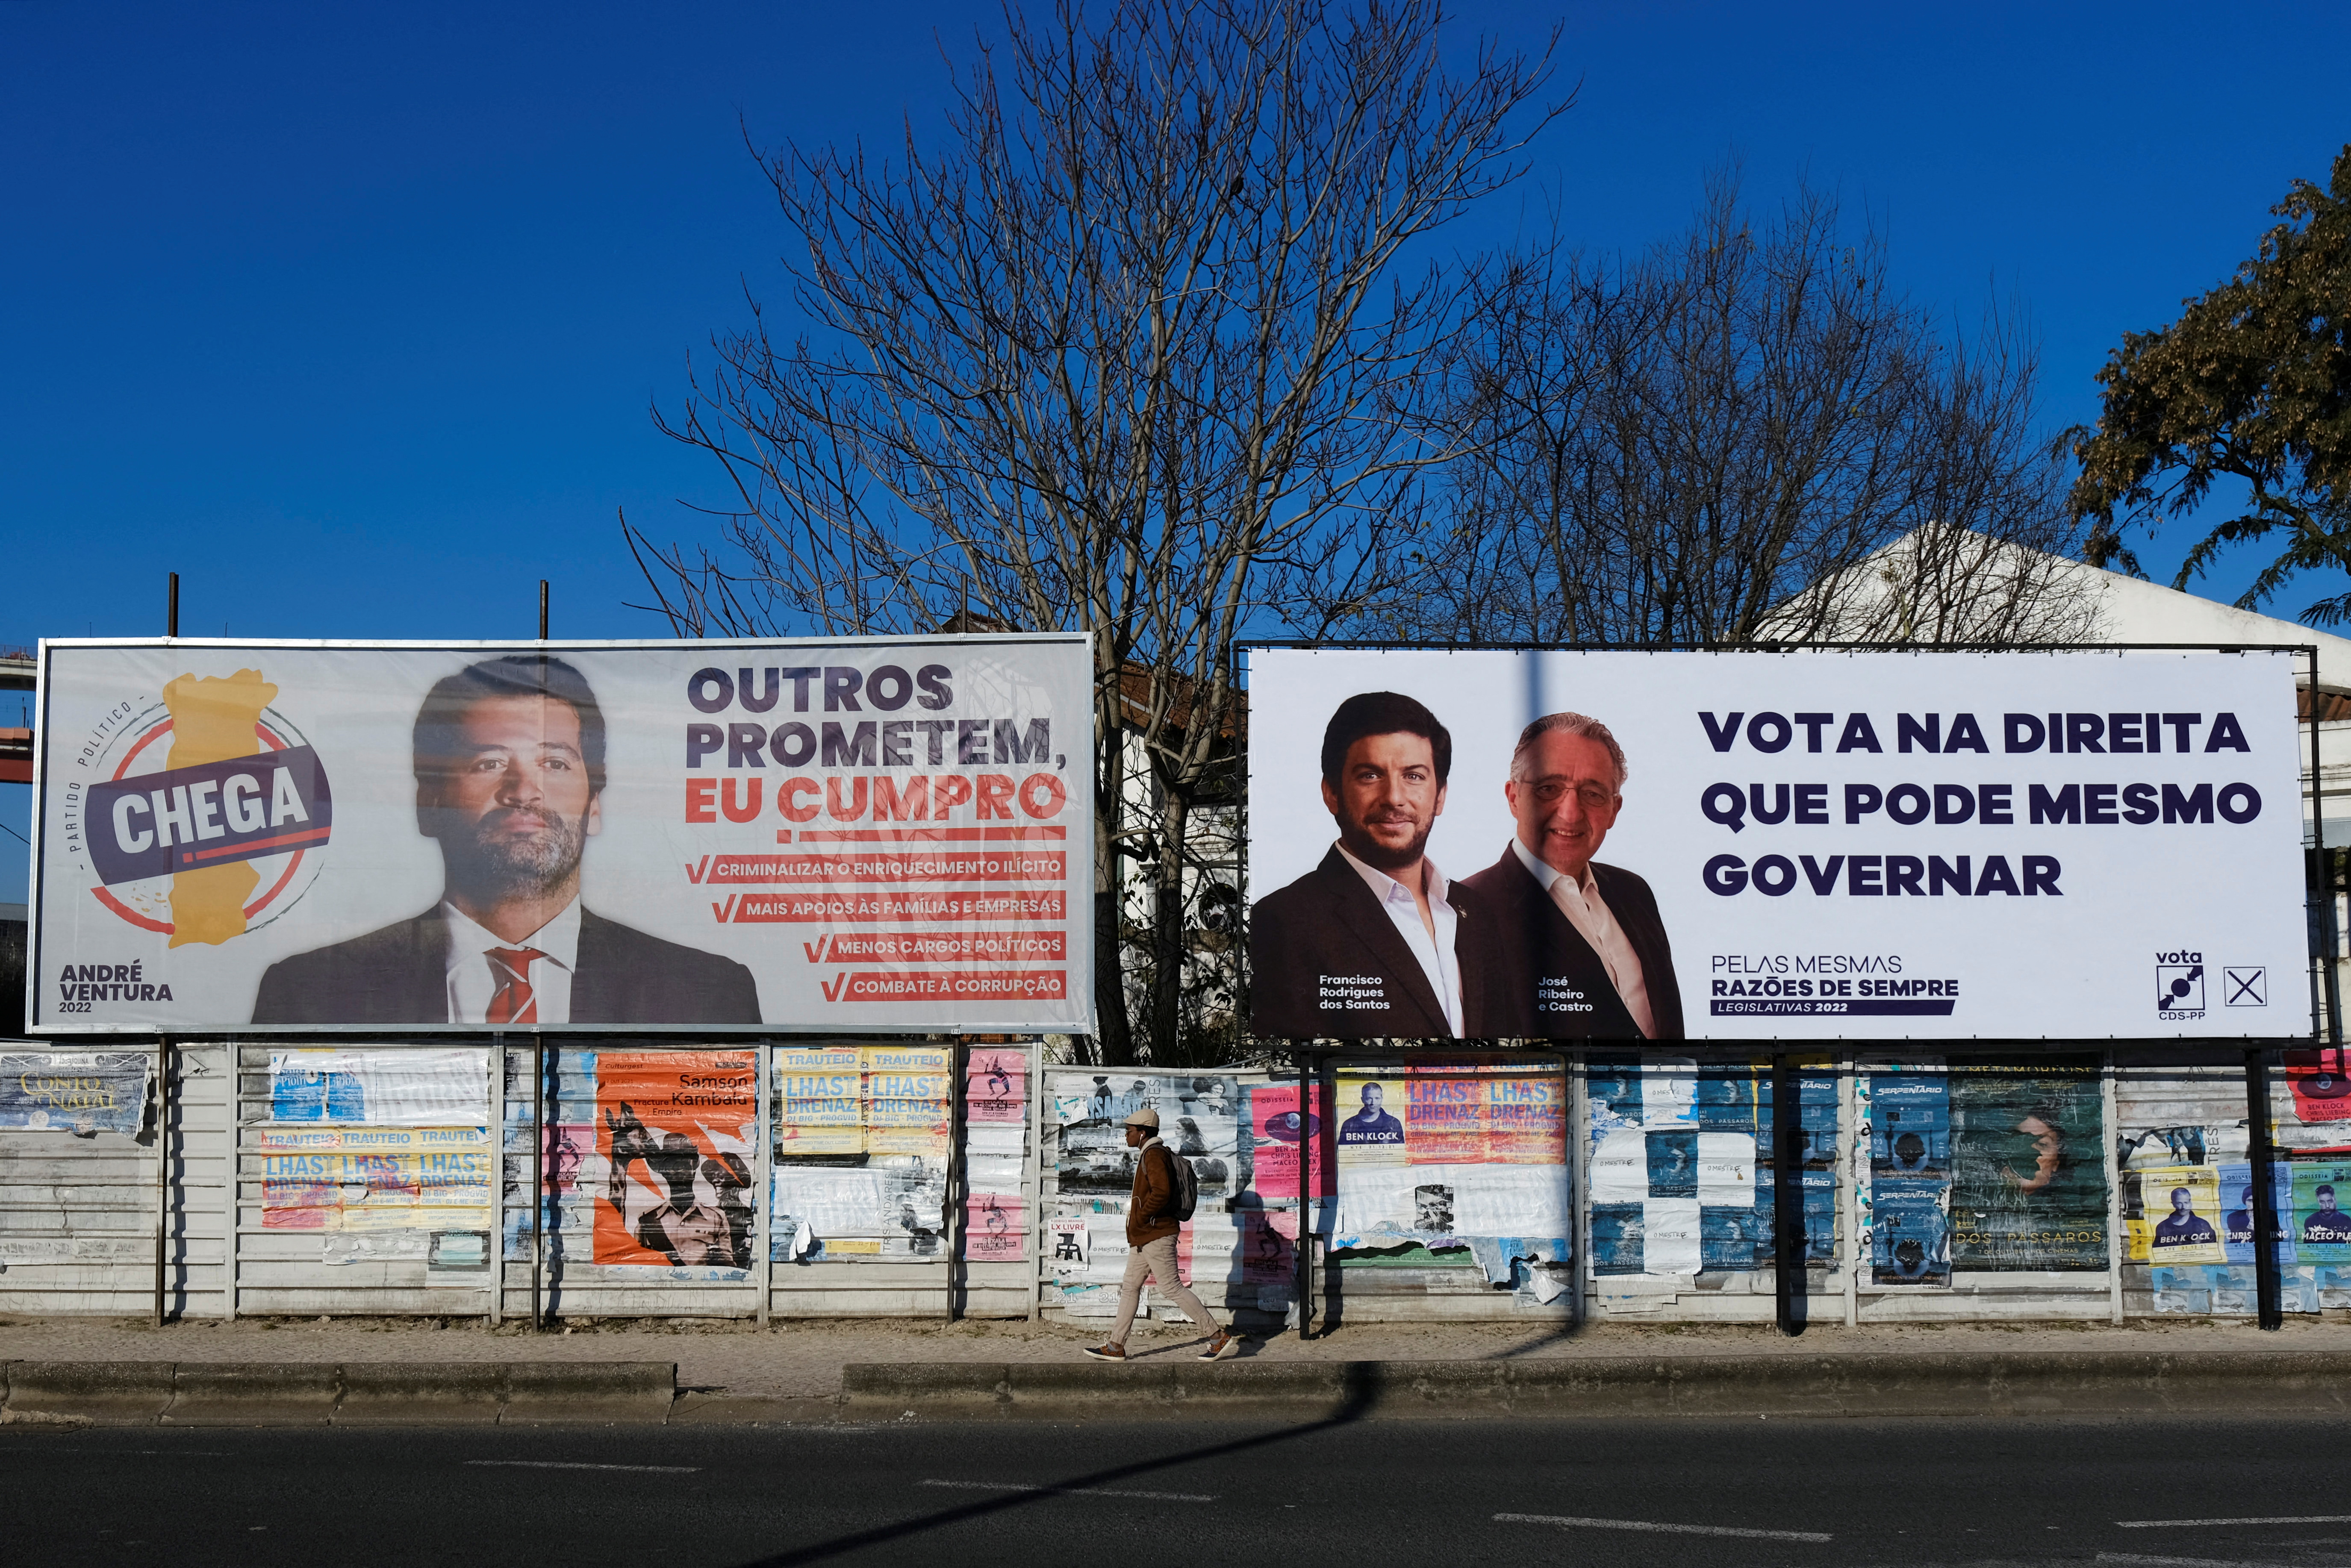 A Chega far right party and Popular Party CDS billboards for the snap elections which is to take place on January 30 are seen in Lisbon